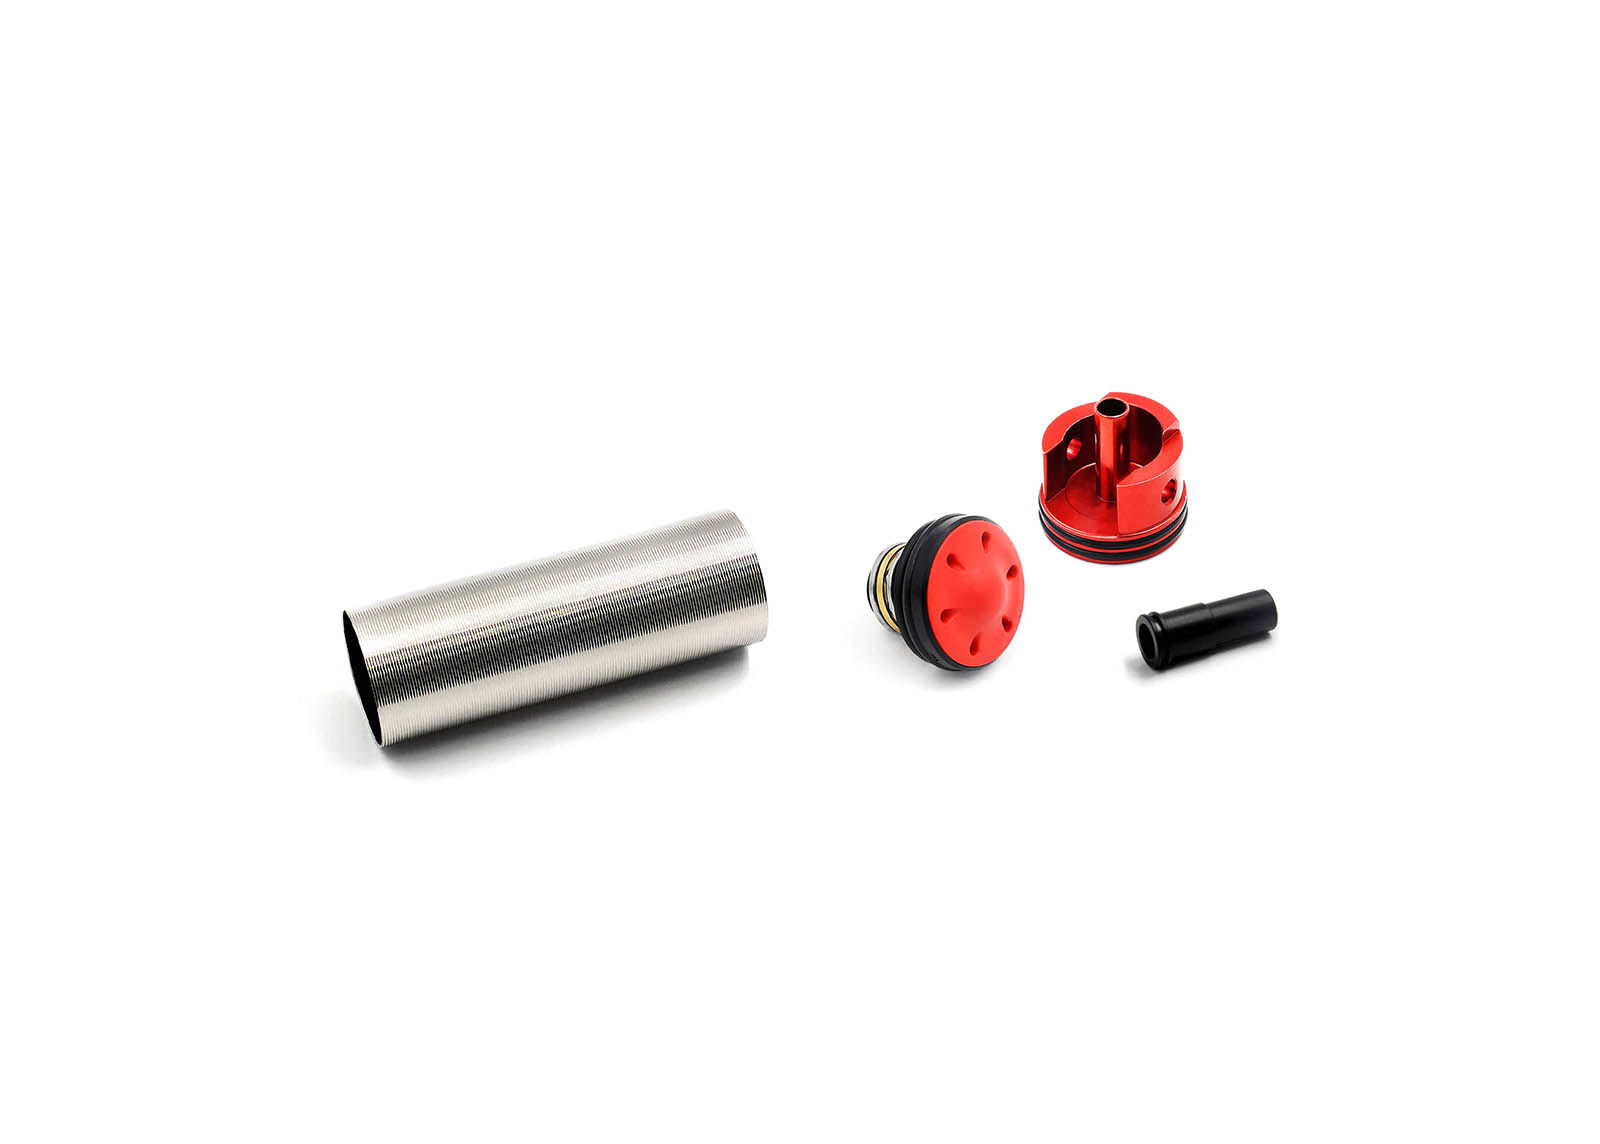 Bore-Up Cylinder Set for SIG550 - Modify AEG Airsoft parts